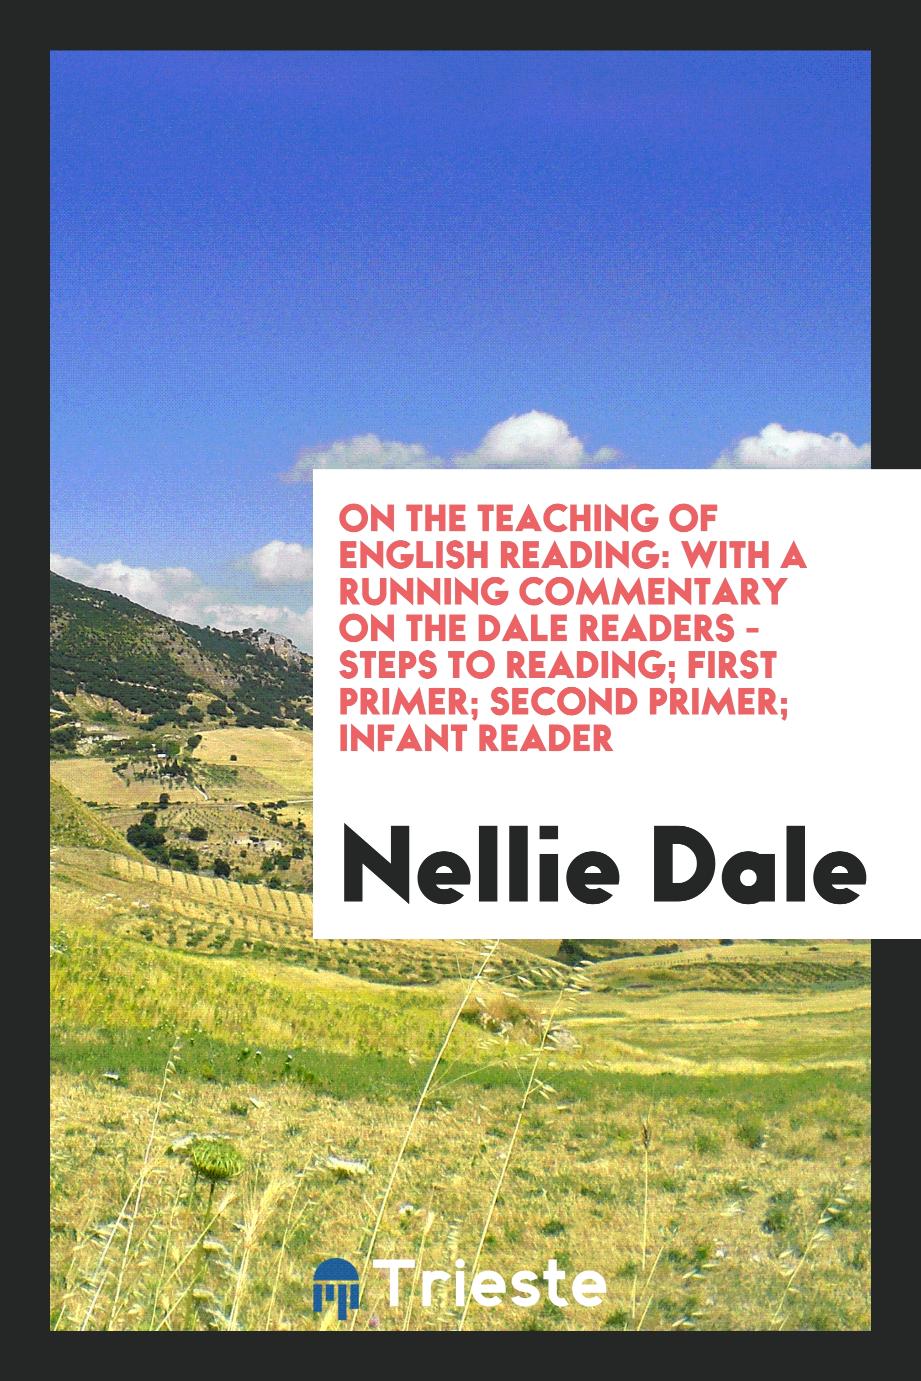 On the teaching of English reading: with a running commentary on the Dale readers - steps to reading; first primer; second primer; infant reader